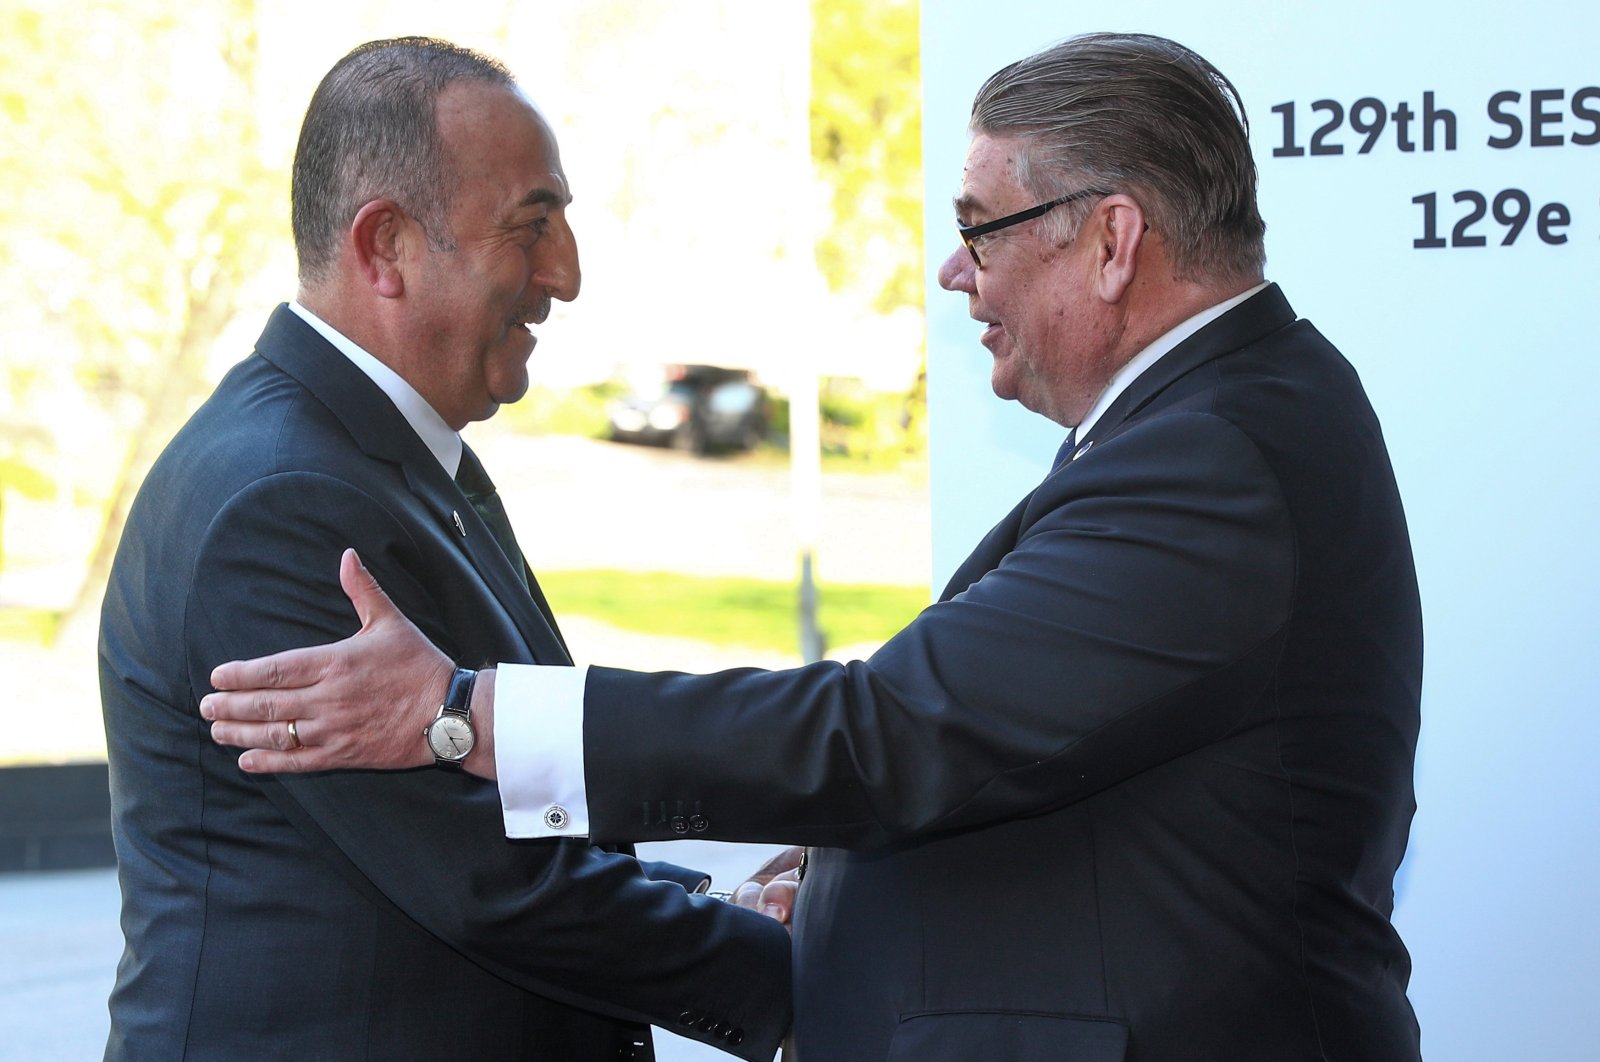 Turkish Foreign Minister Mevlüt Çavuşoğlu (L) is welcomed by Timo Soini, Finland's foreign minister and chairperson of the Committee of Ministers, ahead of the 129th session of the Committee of Ministers of the Council of Europe, Helsinki, Finland, May 17, 2019. (Getty Images)